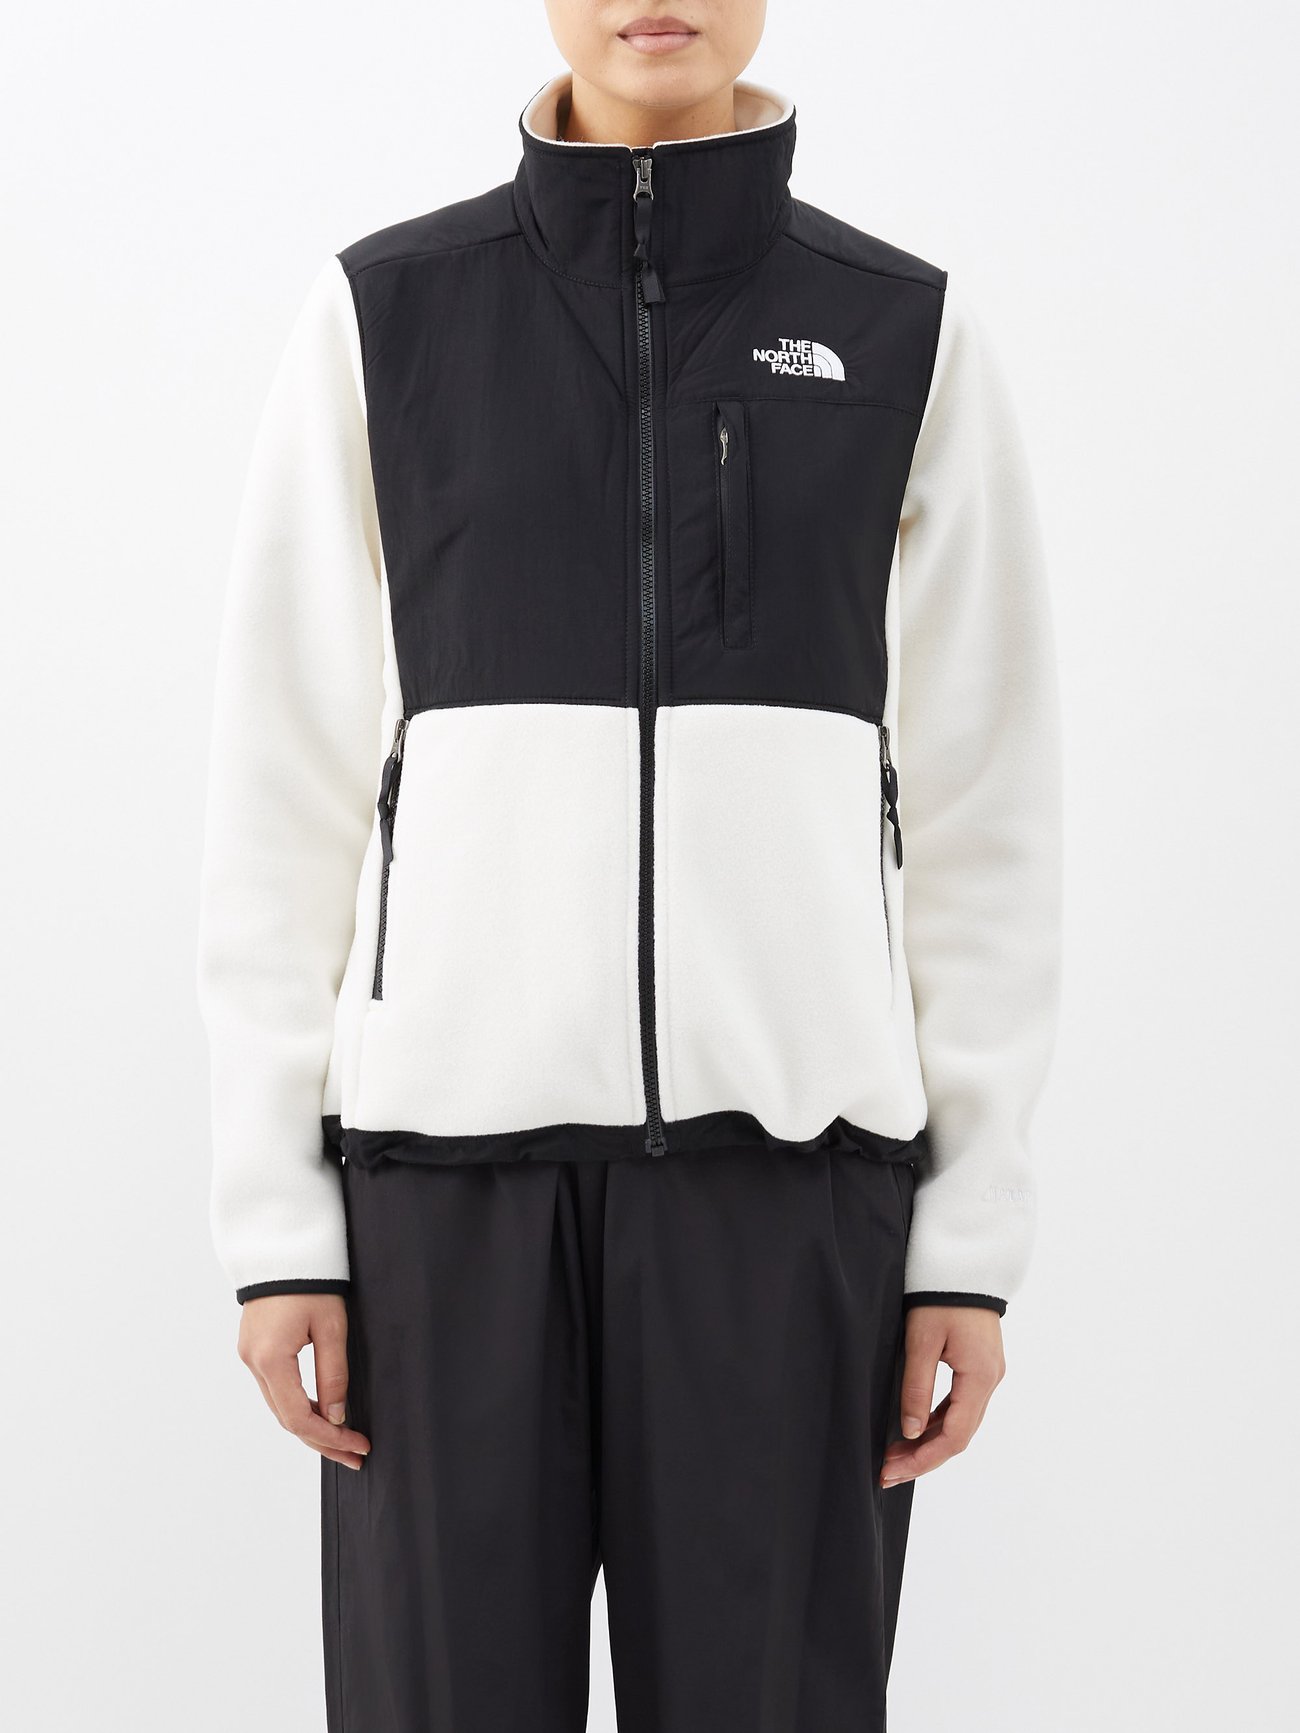 White Denali shell and fleece | The North Face | MATCHESFASHION